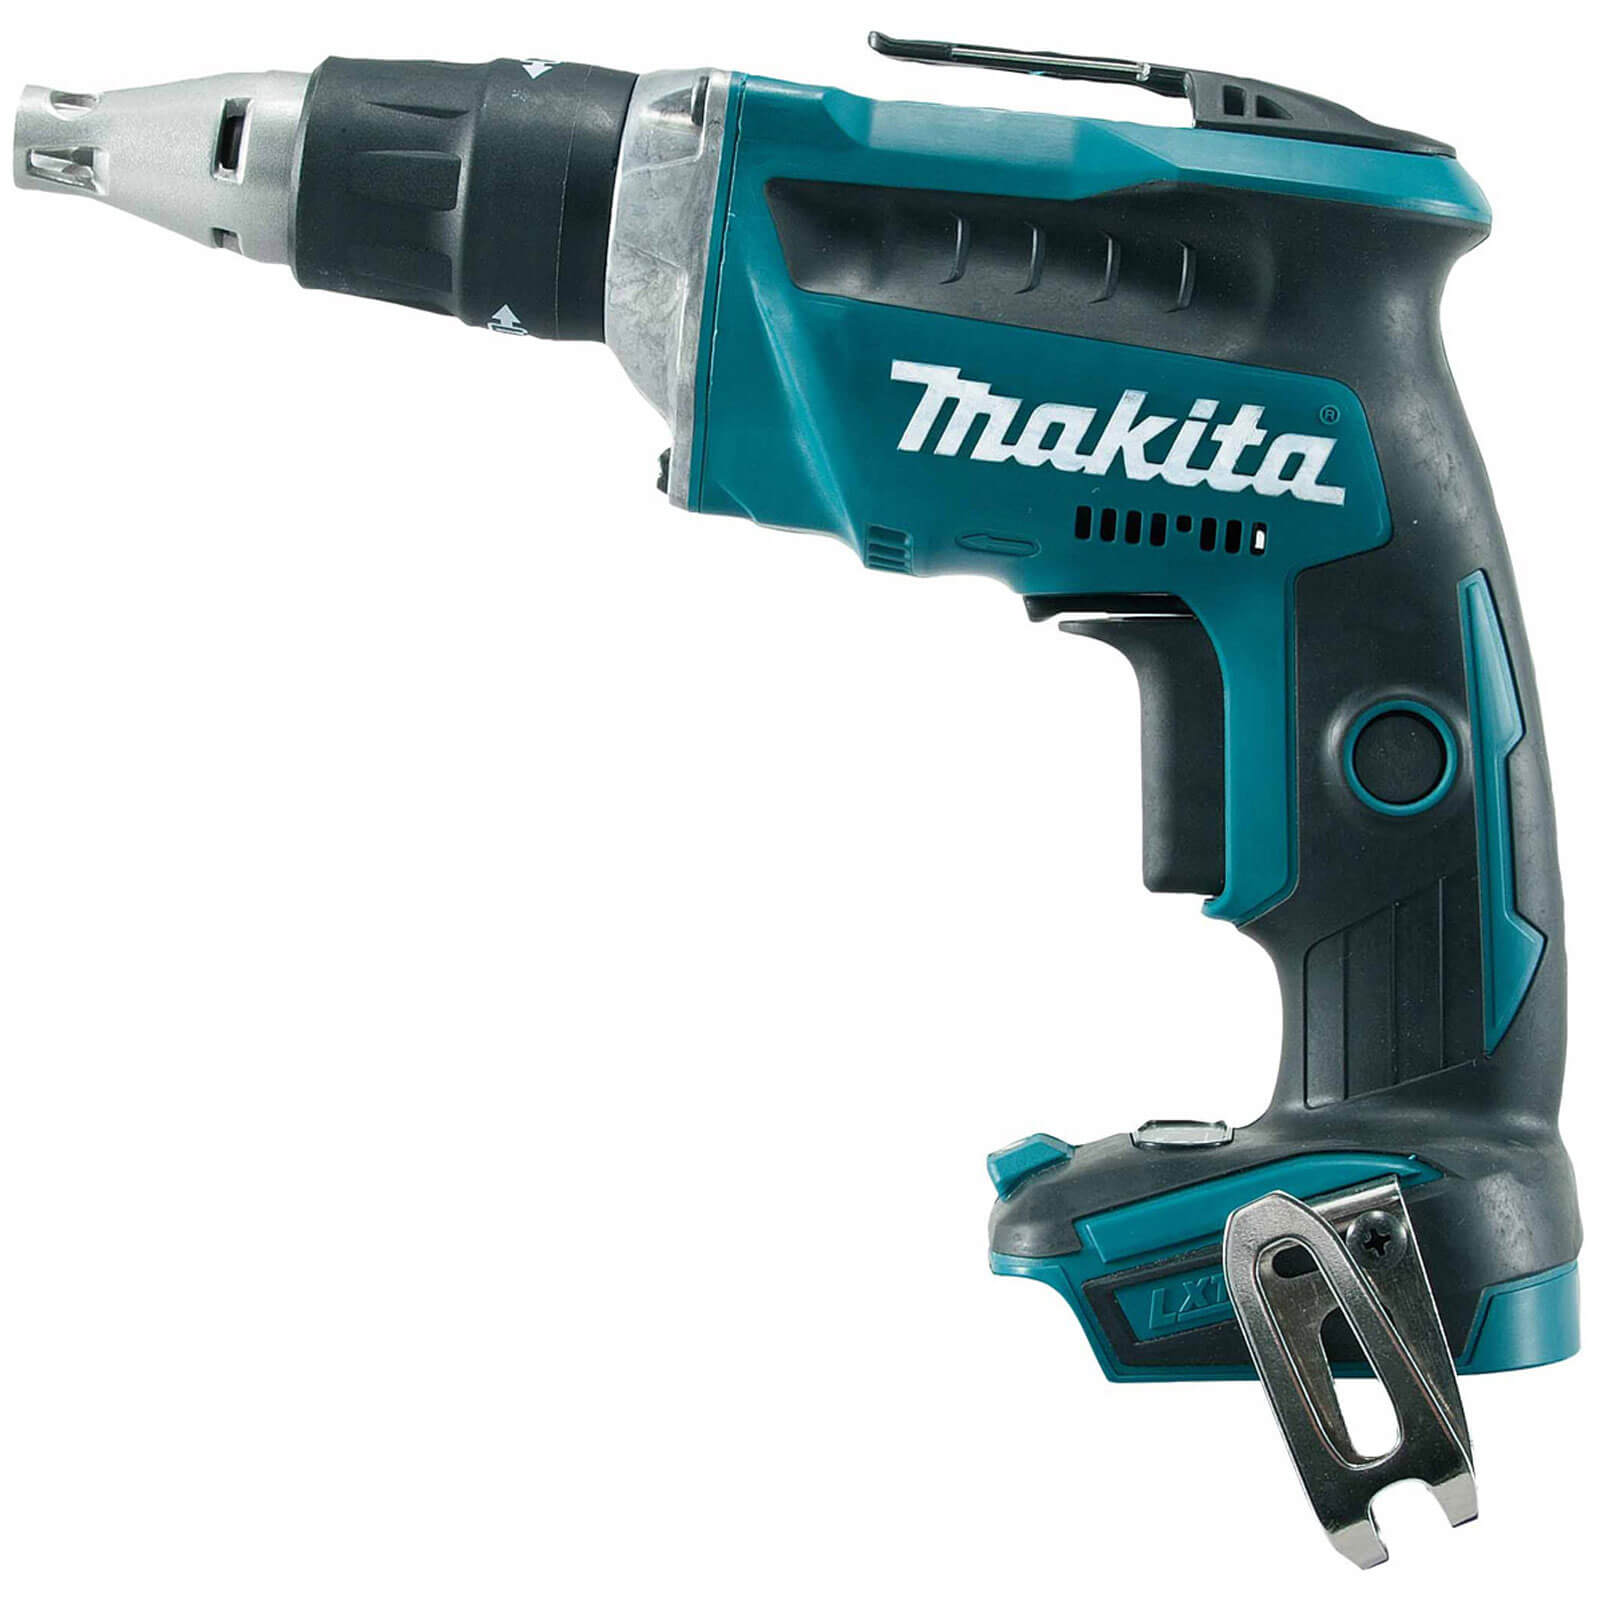 Image of Makita DFS452 18v LXT Cordless Brushless Drywall Screwdriver No Batteries No Charger No Case